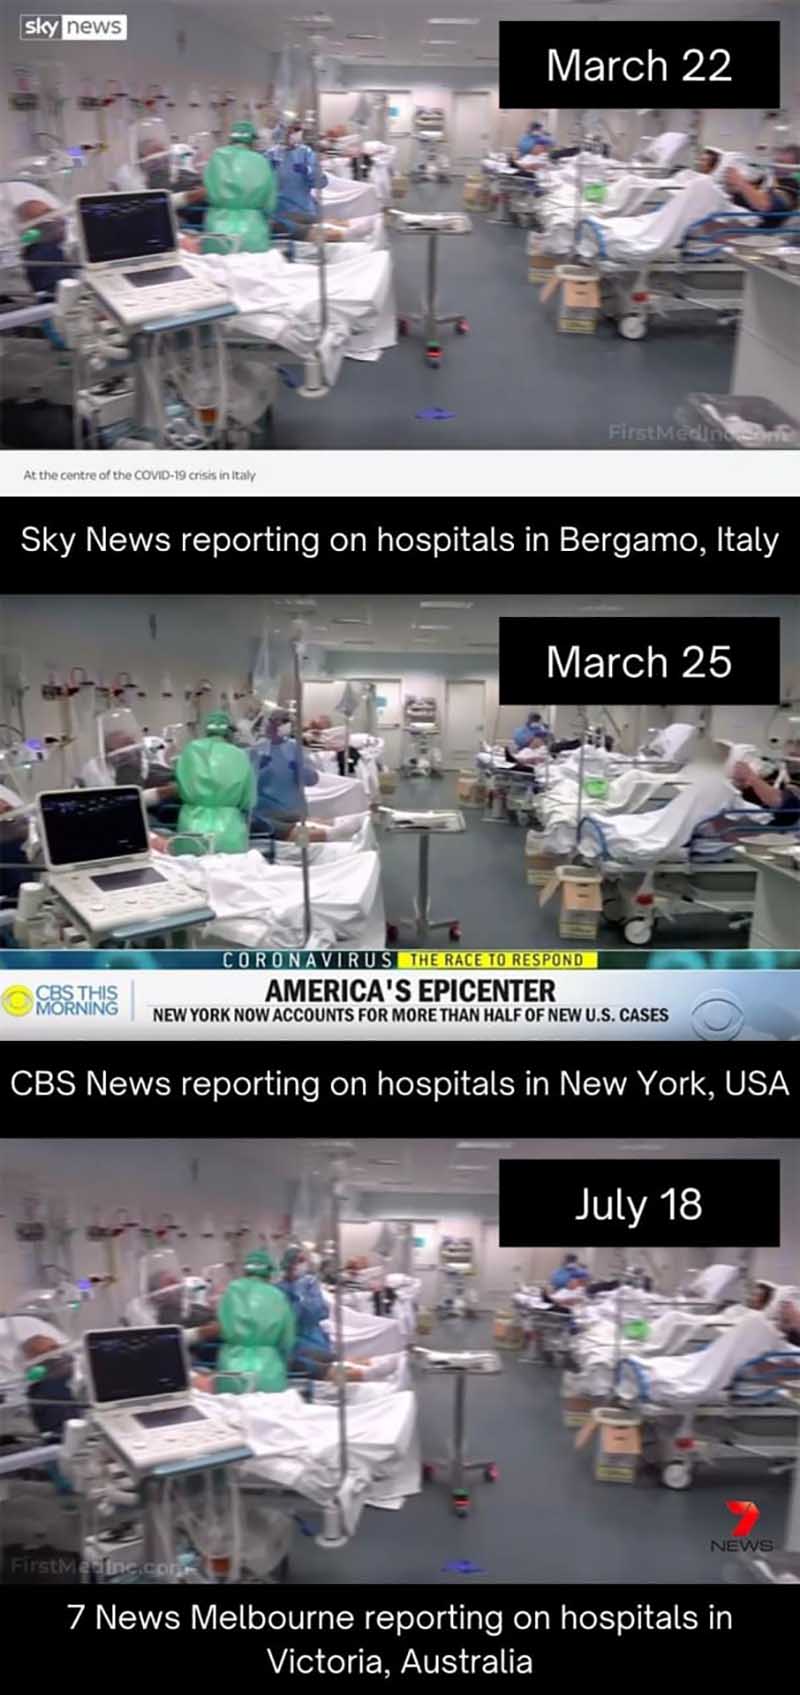 TV news lying about where the hospital footage is from